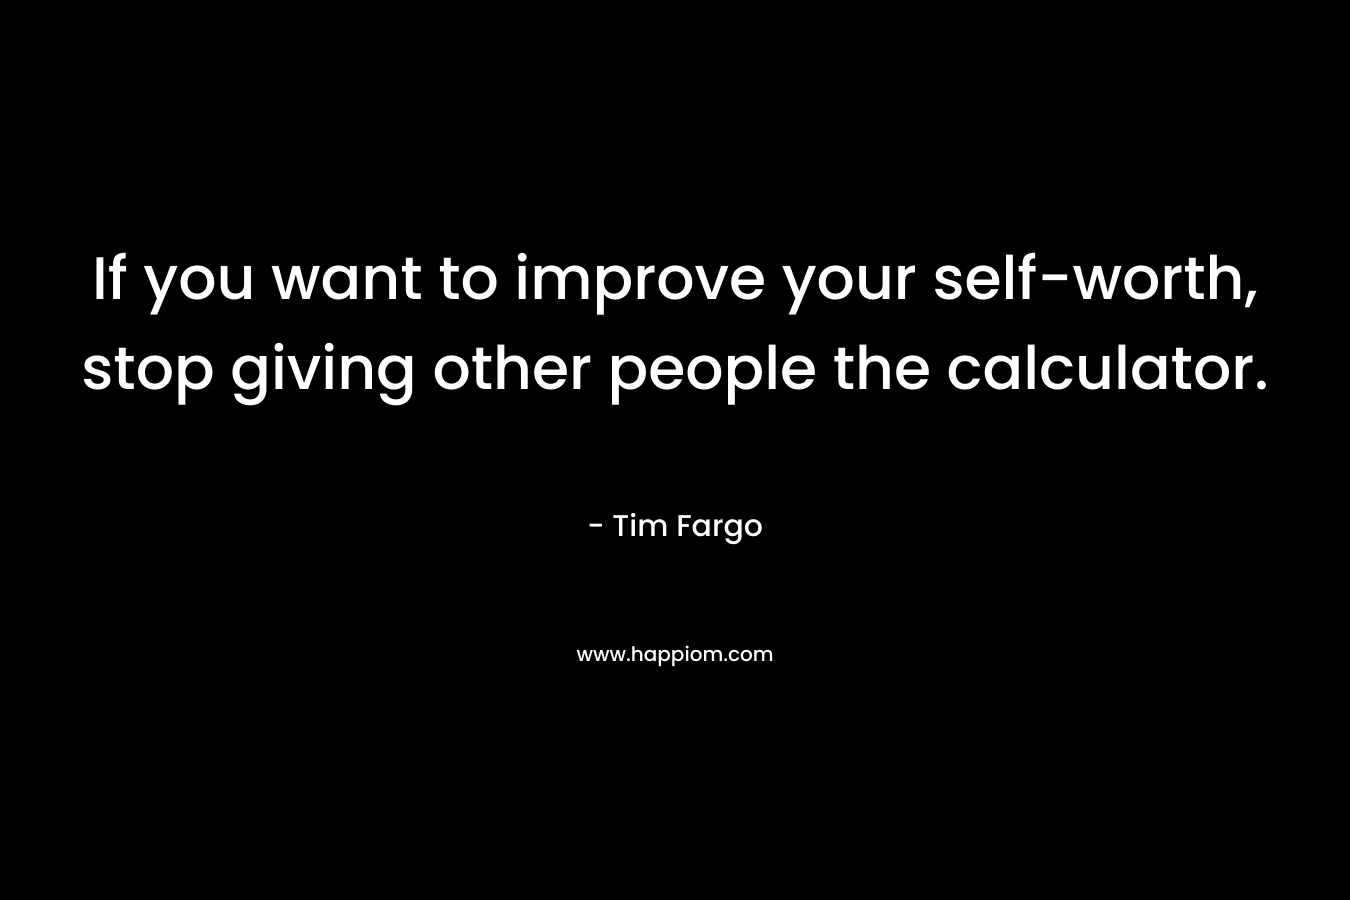 If you want to improve your self-worth, stop giving other people the calculator. – Tim Fargo